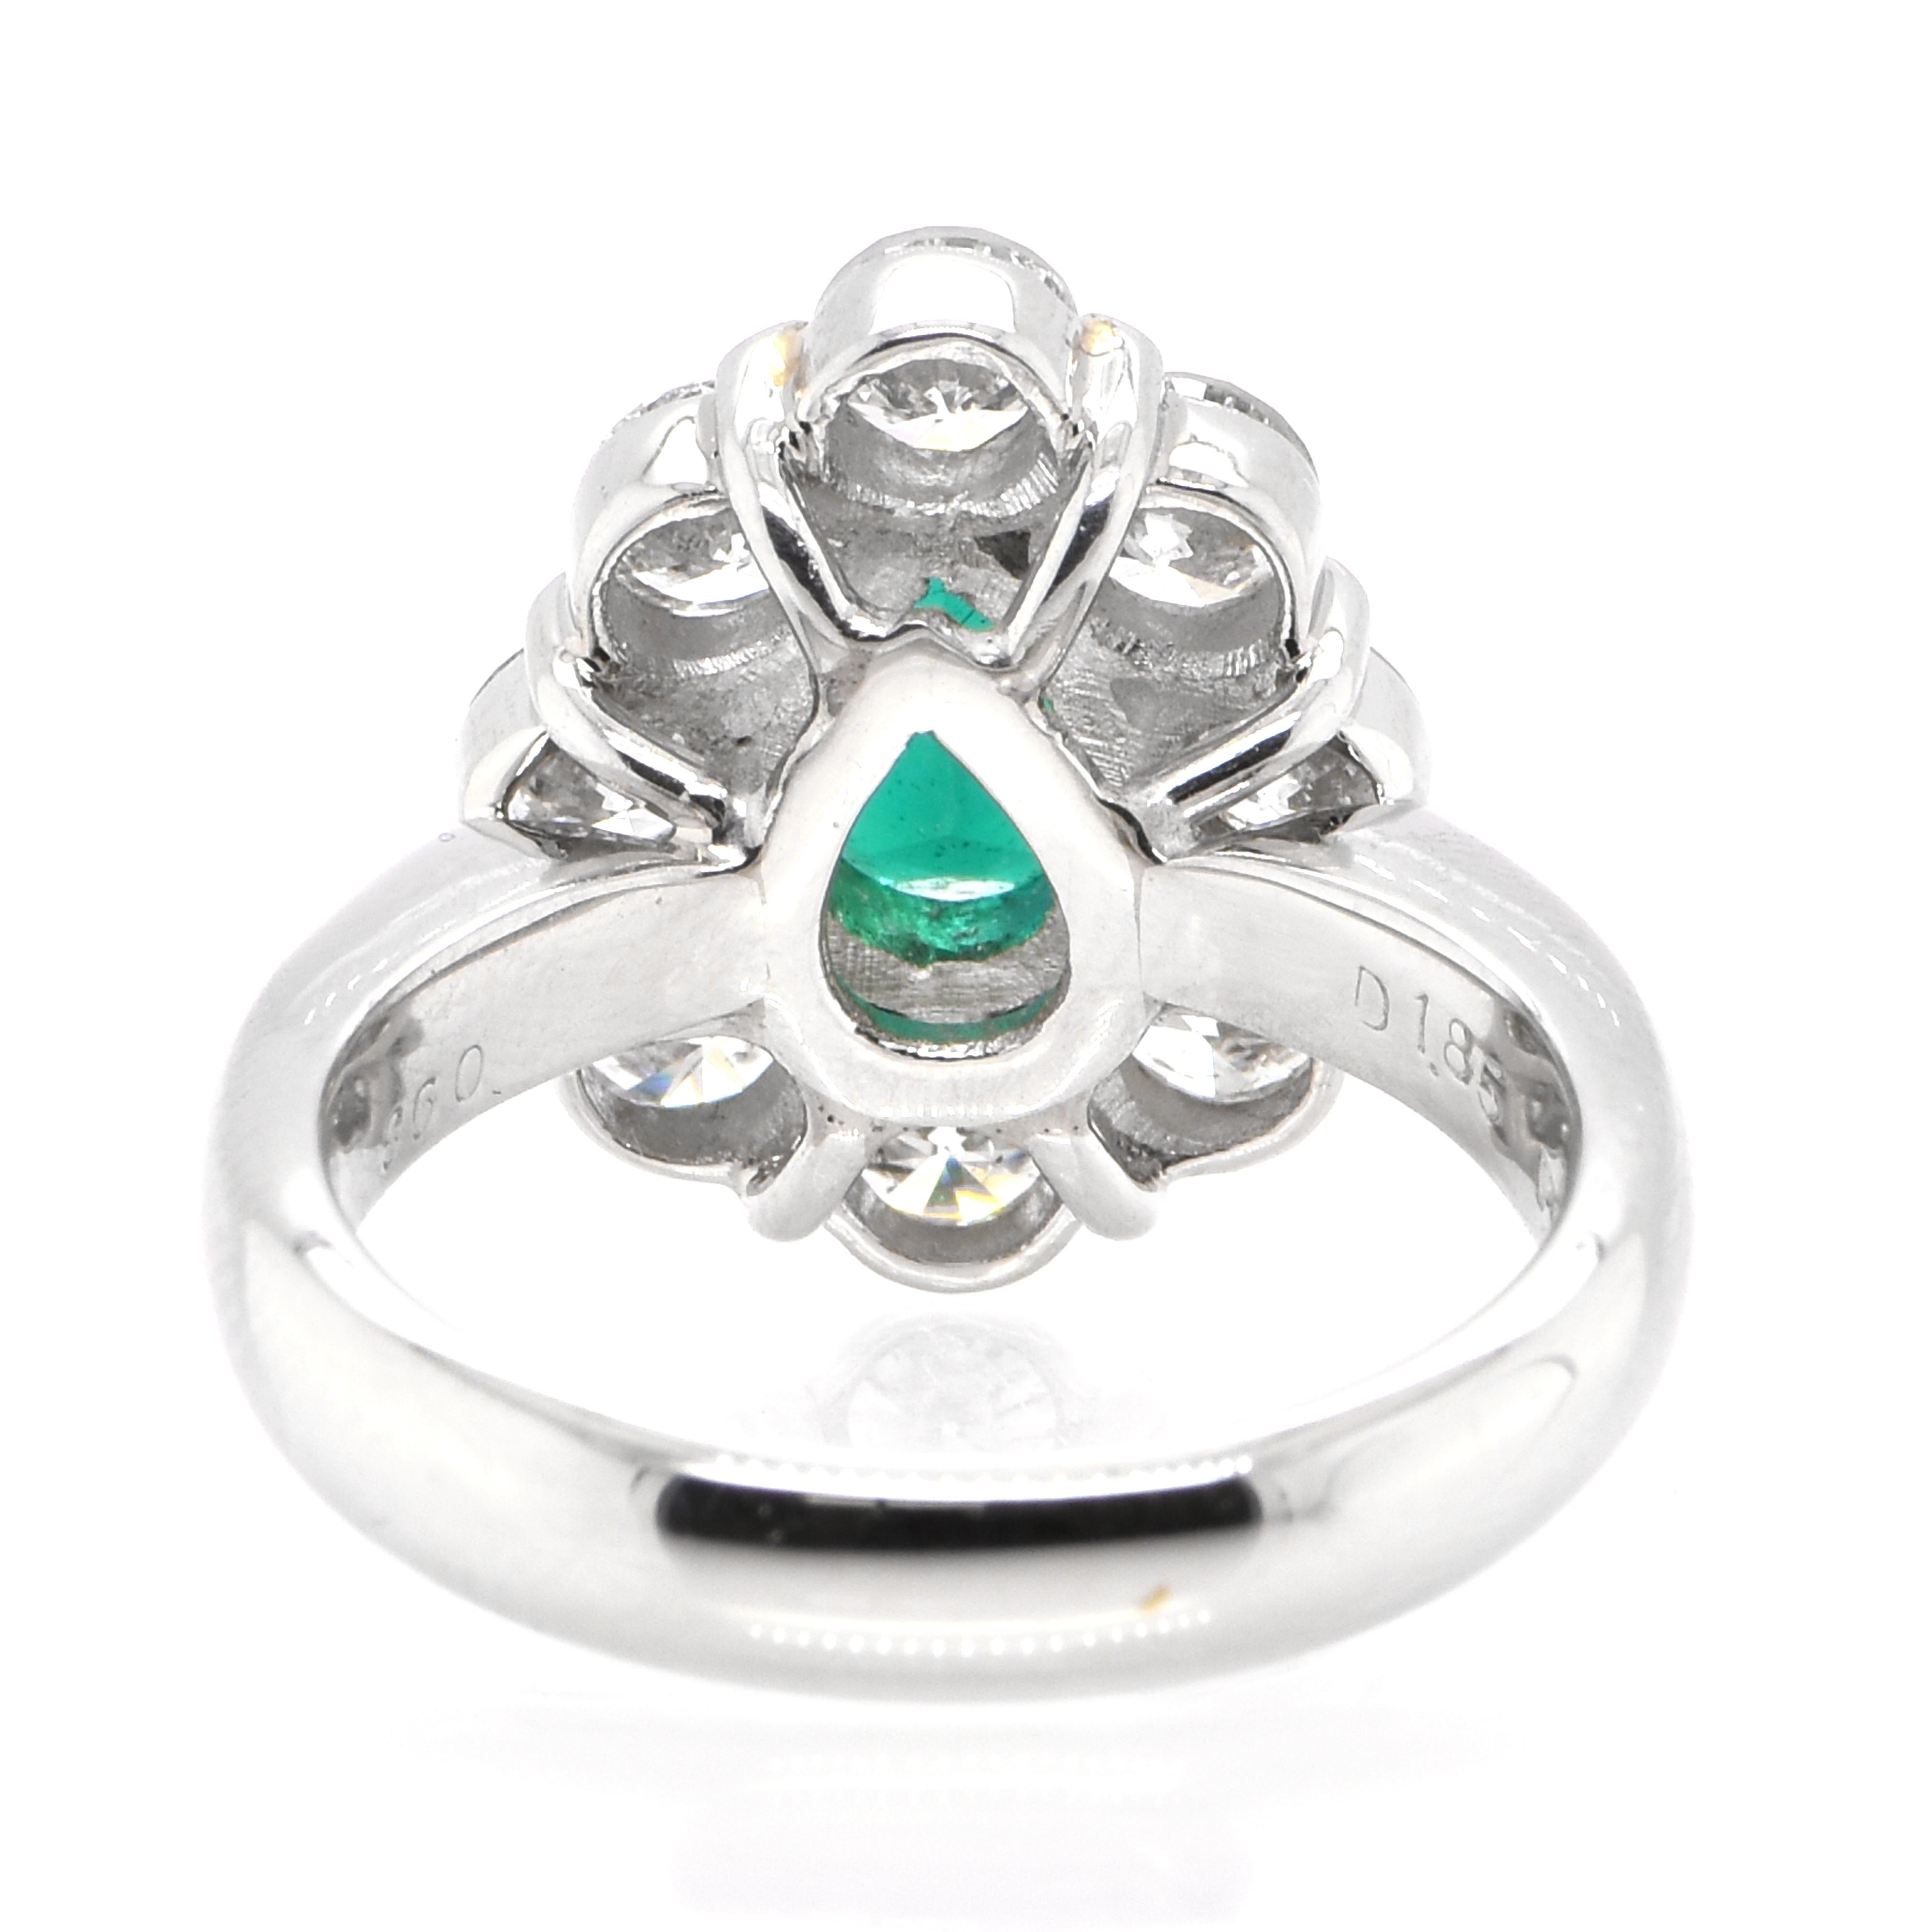 Women's 0.98 Carat Natural Pear-Shaped Emerald and Diamond Ring Set in Platinum For Sale